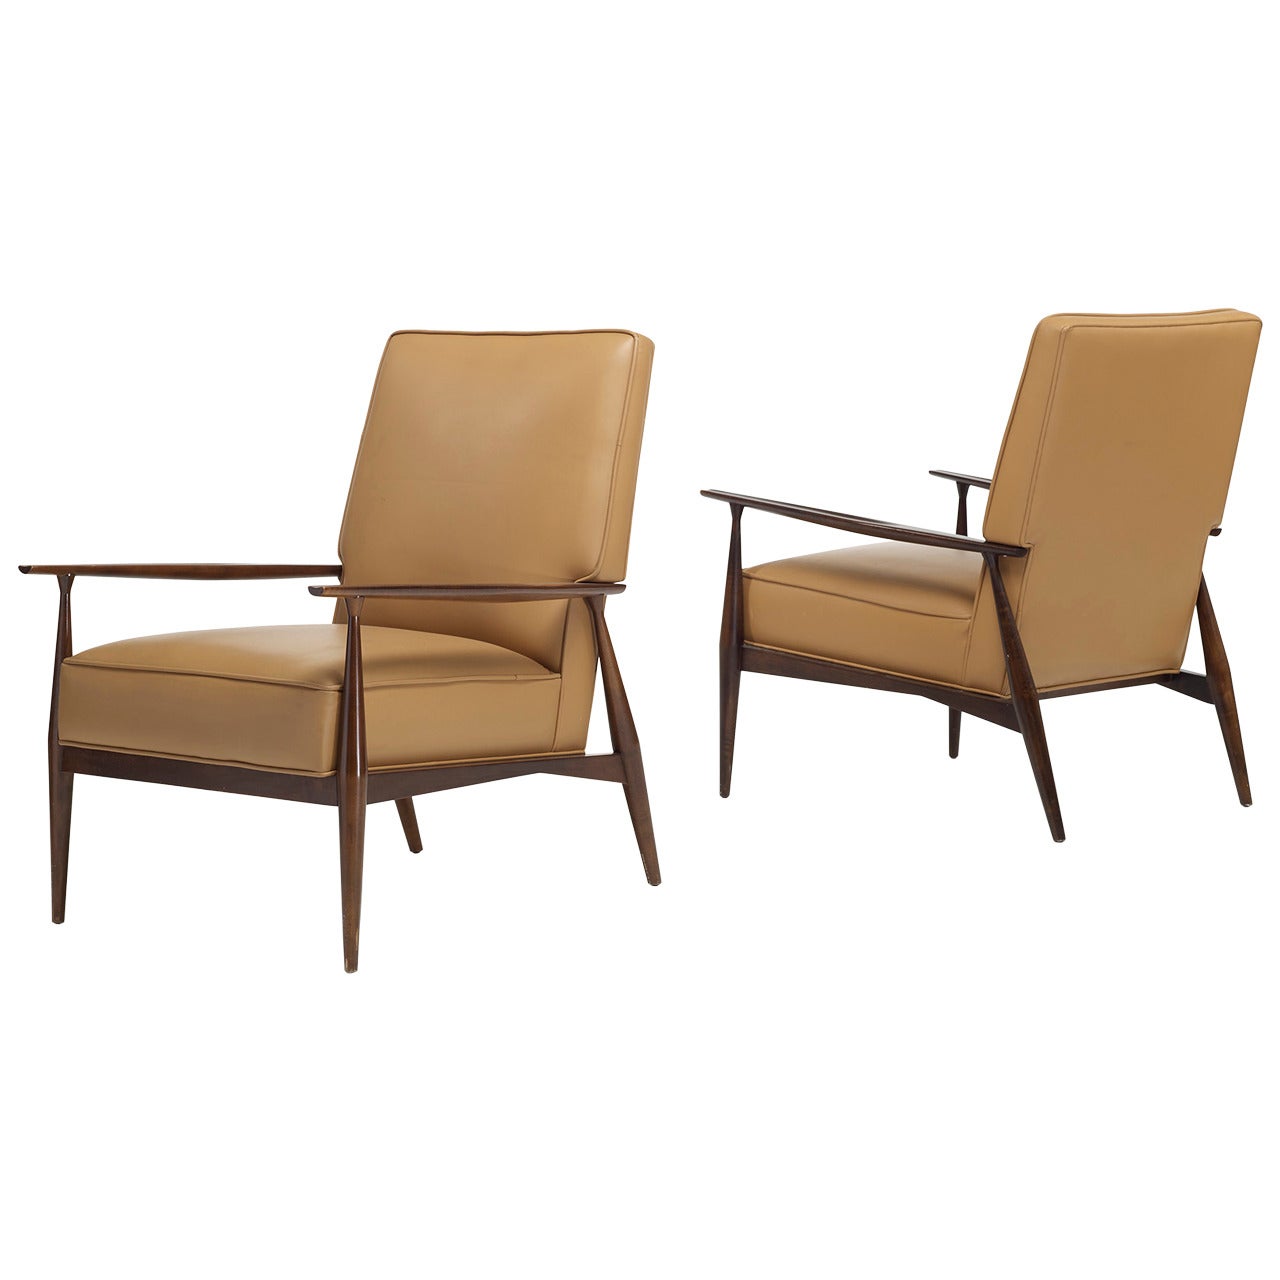 Pair of Lounge Chairs by Paul McCobb for Directional